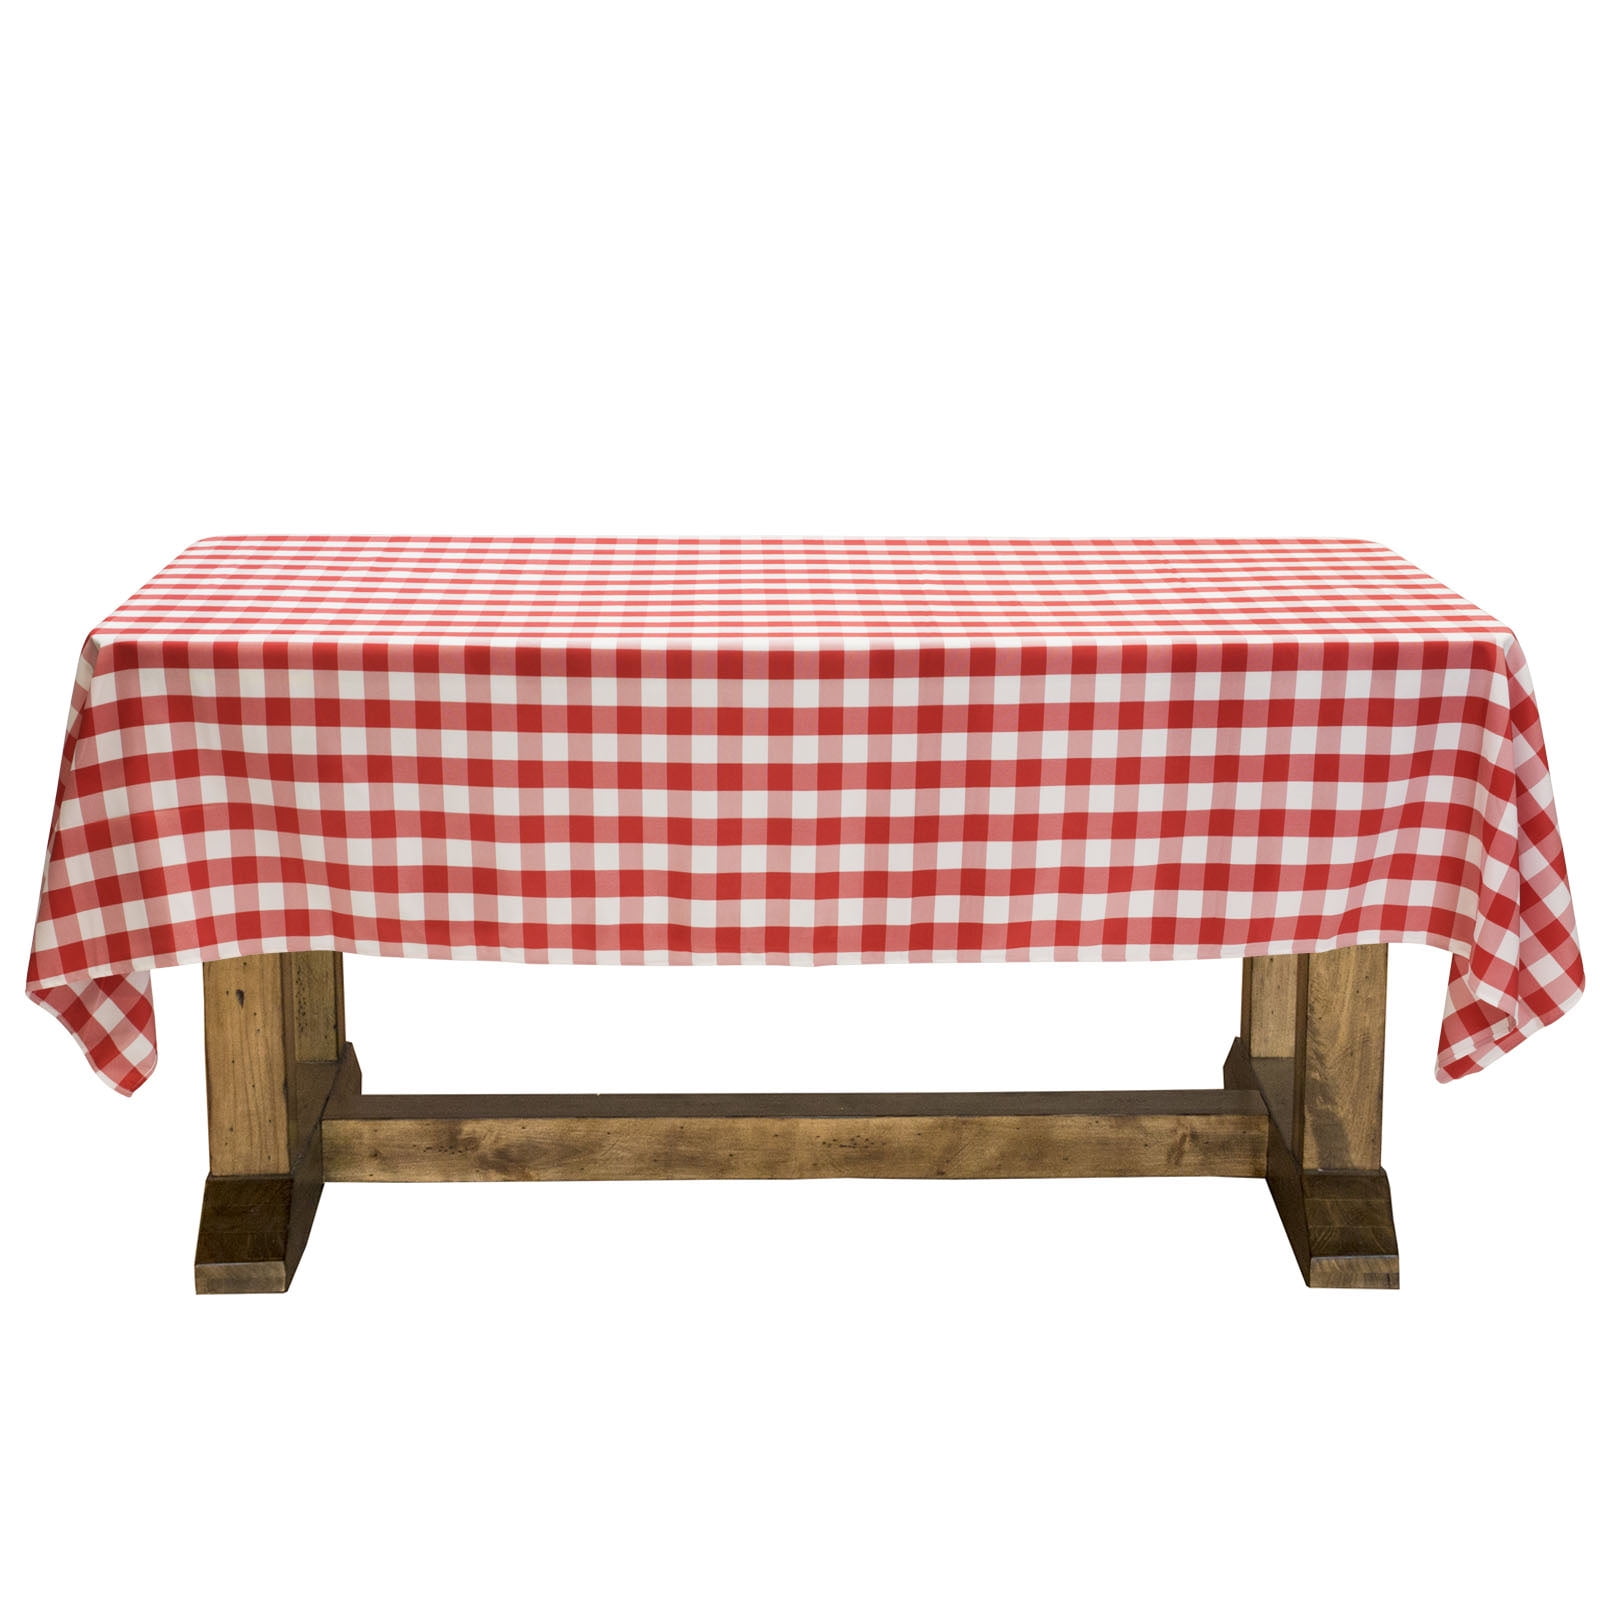 3-Piece Set Vinyl Picnic Table and Bench Fitted Tablecloth Cover 72 Inches Red